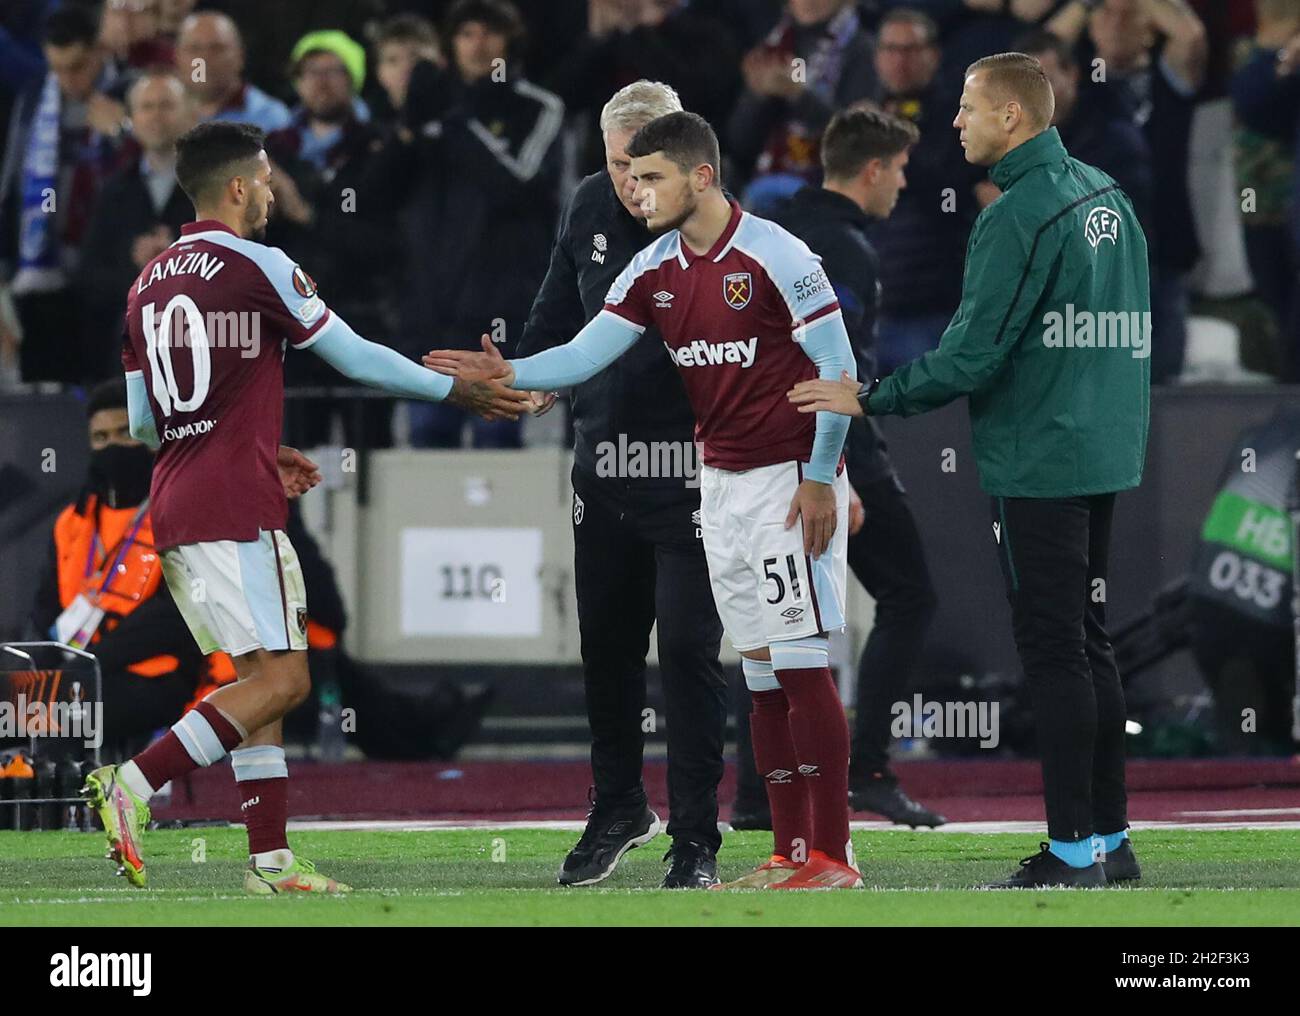 London, England, 21st October 2021. Daniel Chesters of West Ham Utd makes his debut replacing Manuel Lanzini of West Ham Unitedduring the UEFA Europa League match at the London Stadium, London. Picture credit should read: David Klein / Sportimage Stock Photo